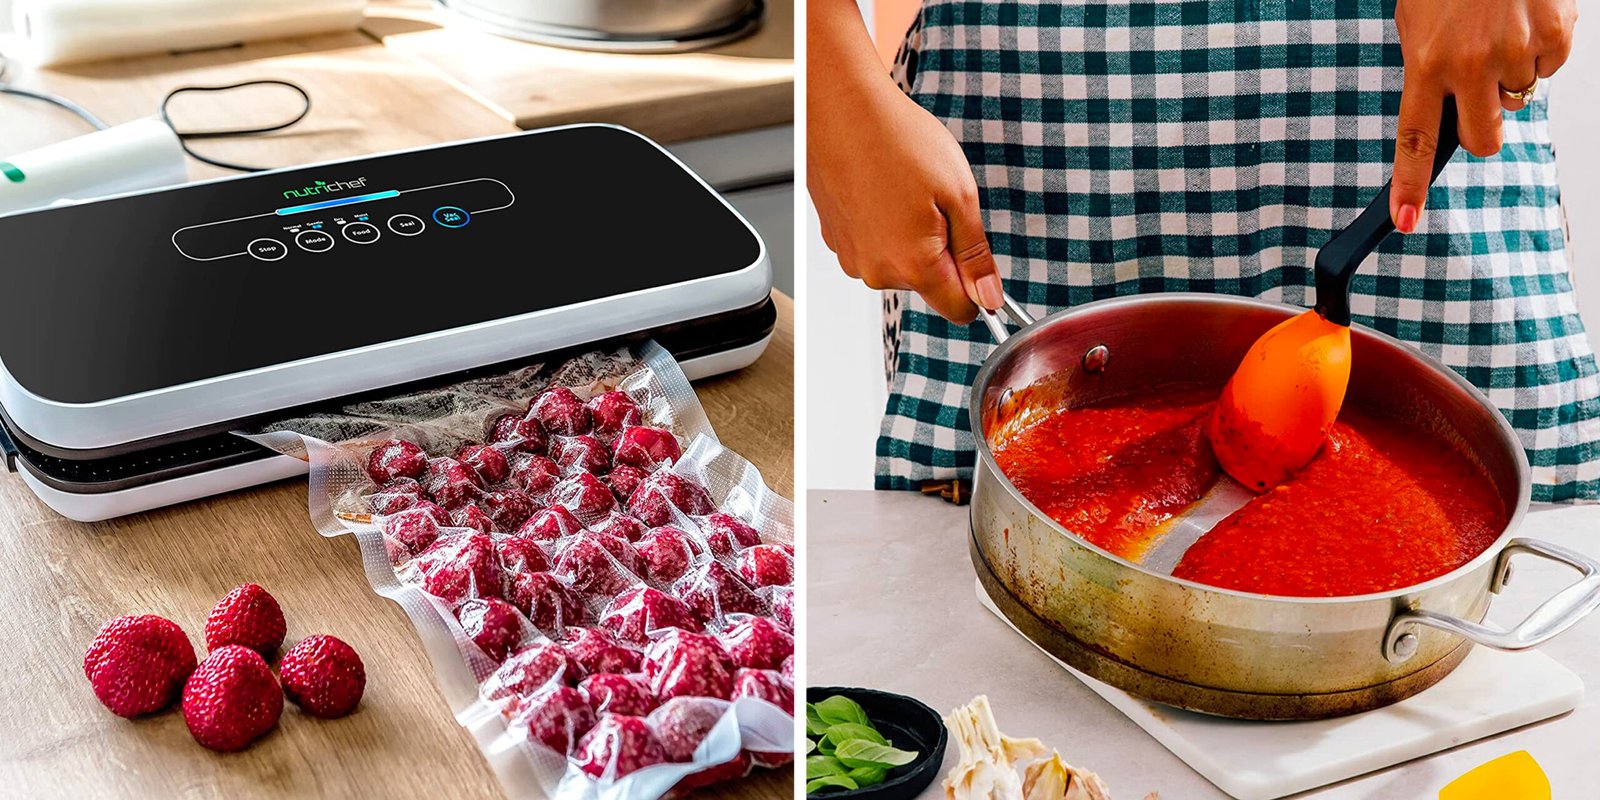 7 Must-Have Kitchen Gadgets for Tasty and Simple Meals